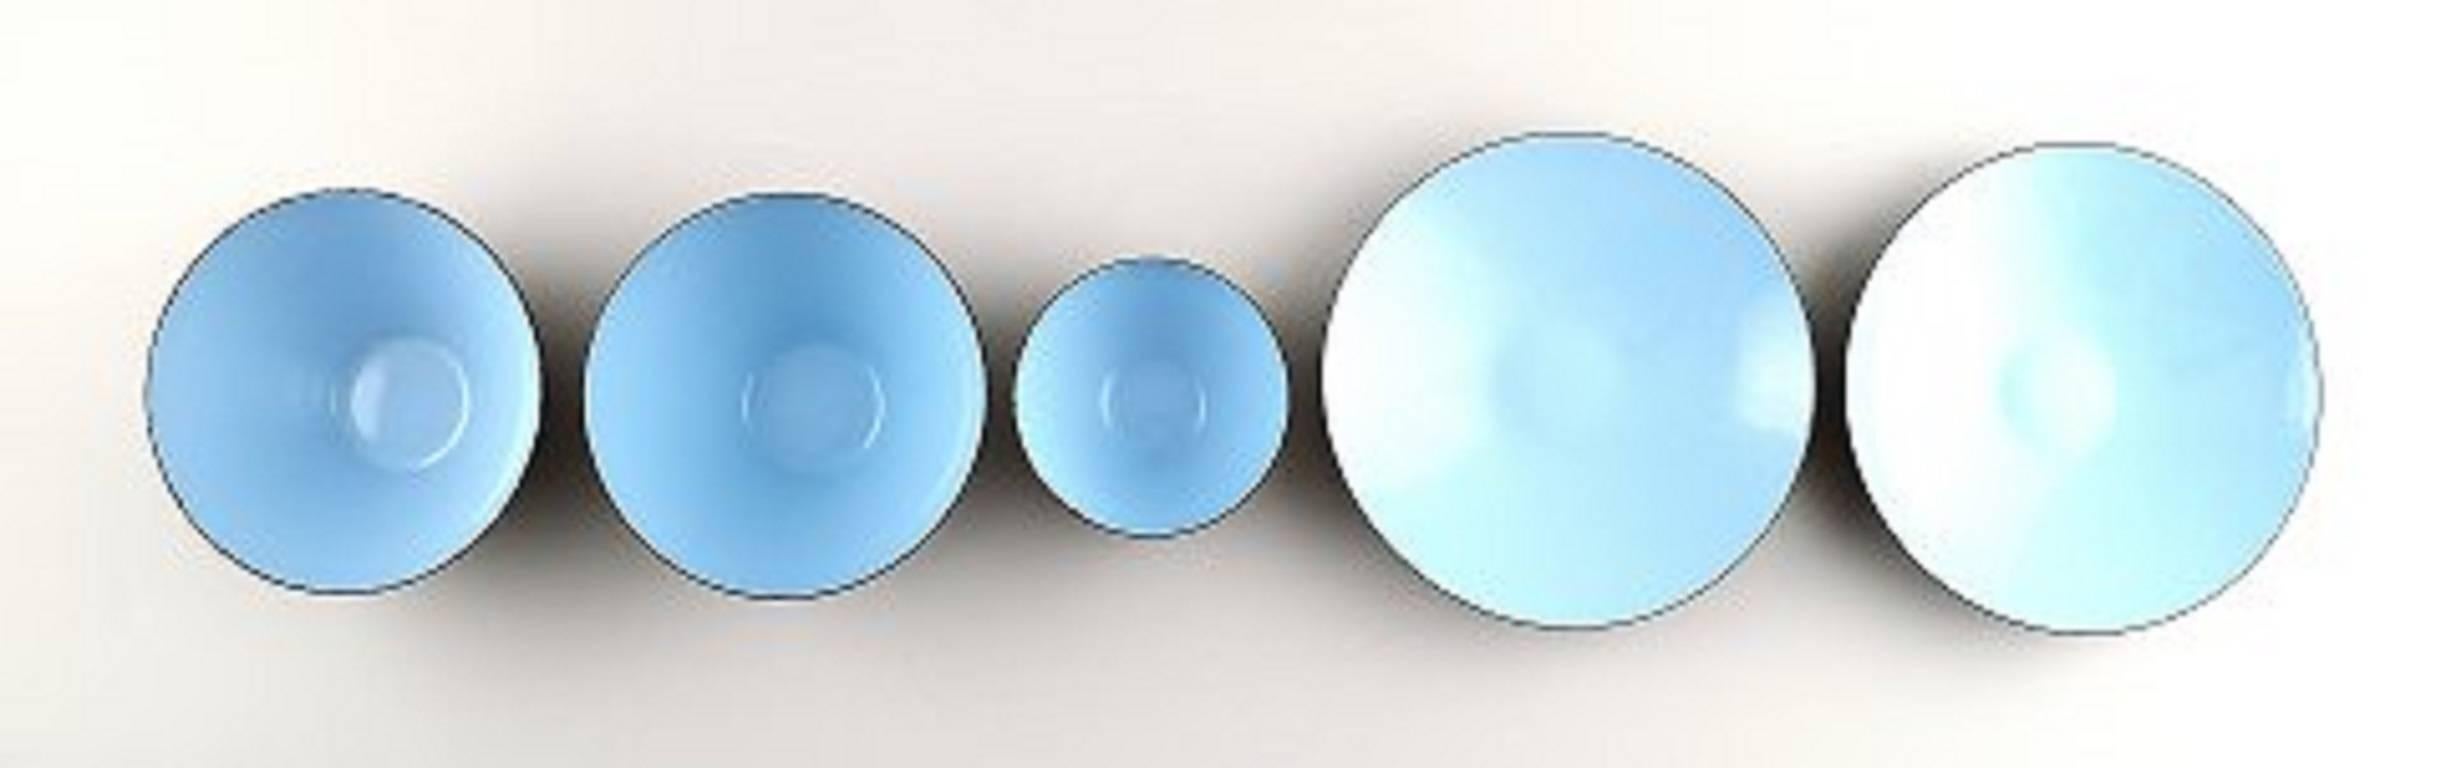 Scandinavian Modern Krenit 3 Bowls and Two Dishes by Herbert Krenchel, 1970s, Danish Design For Sale